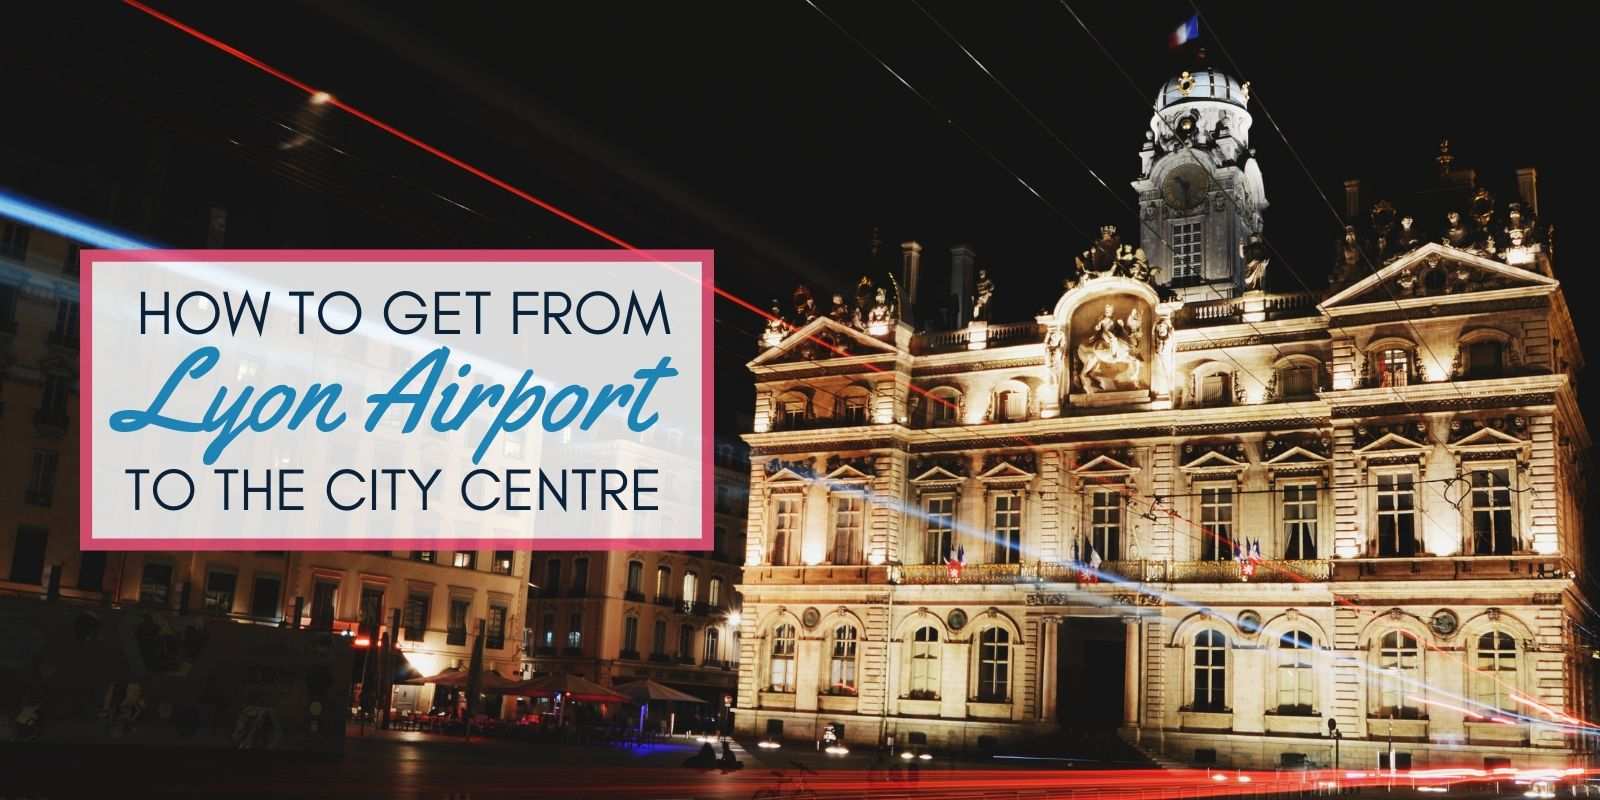 How to from Lyon airport to city centre